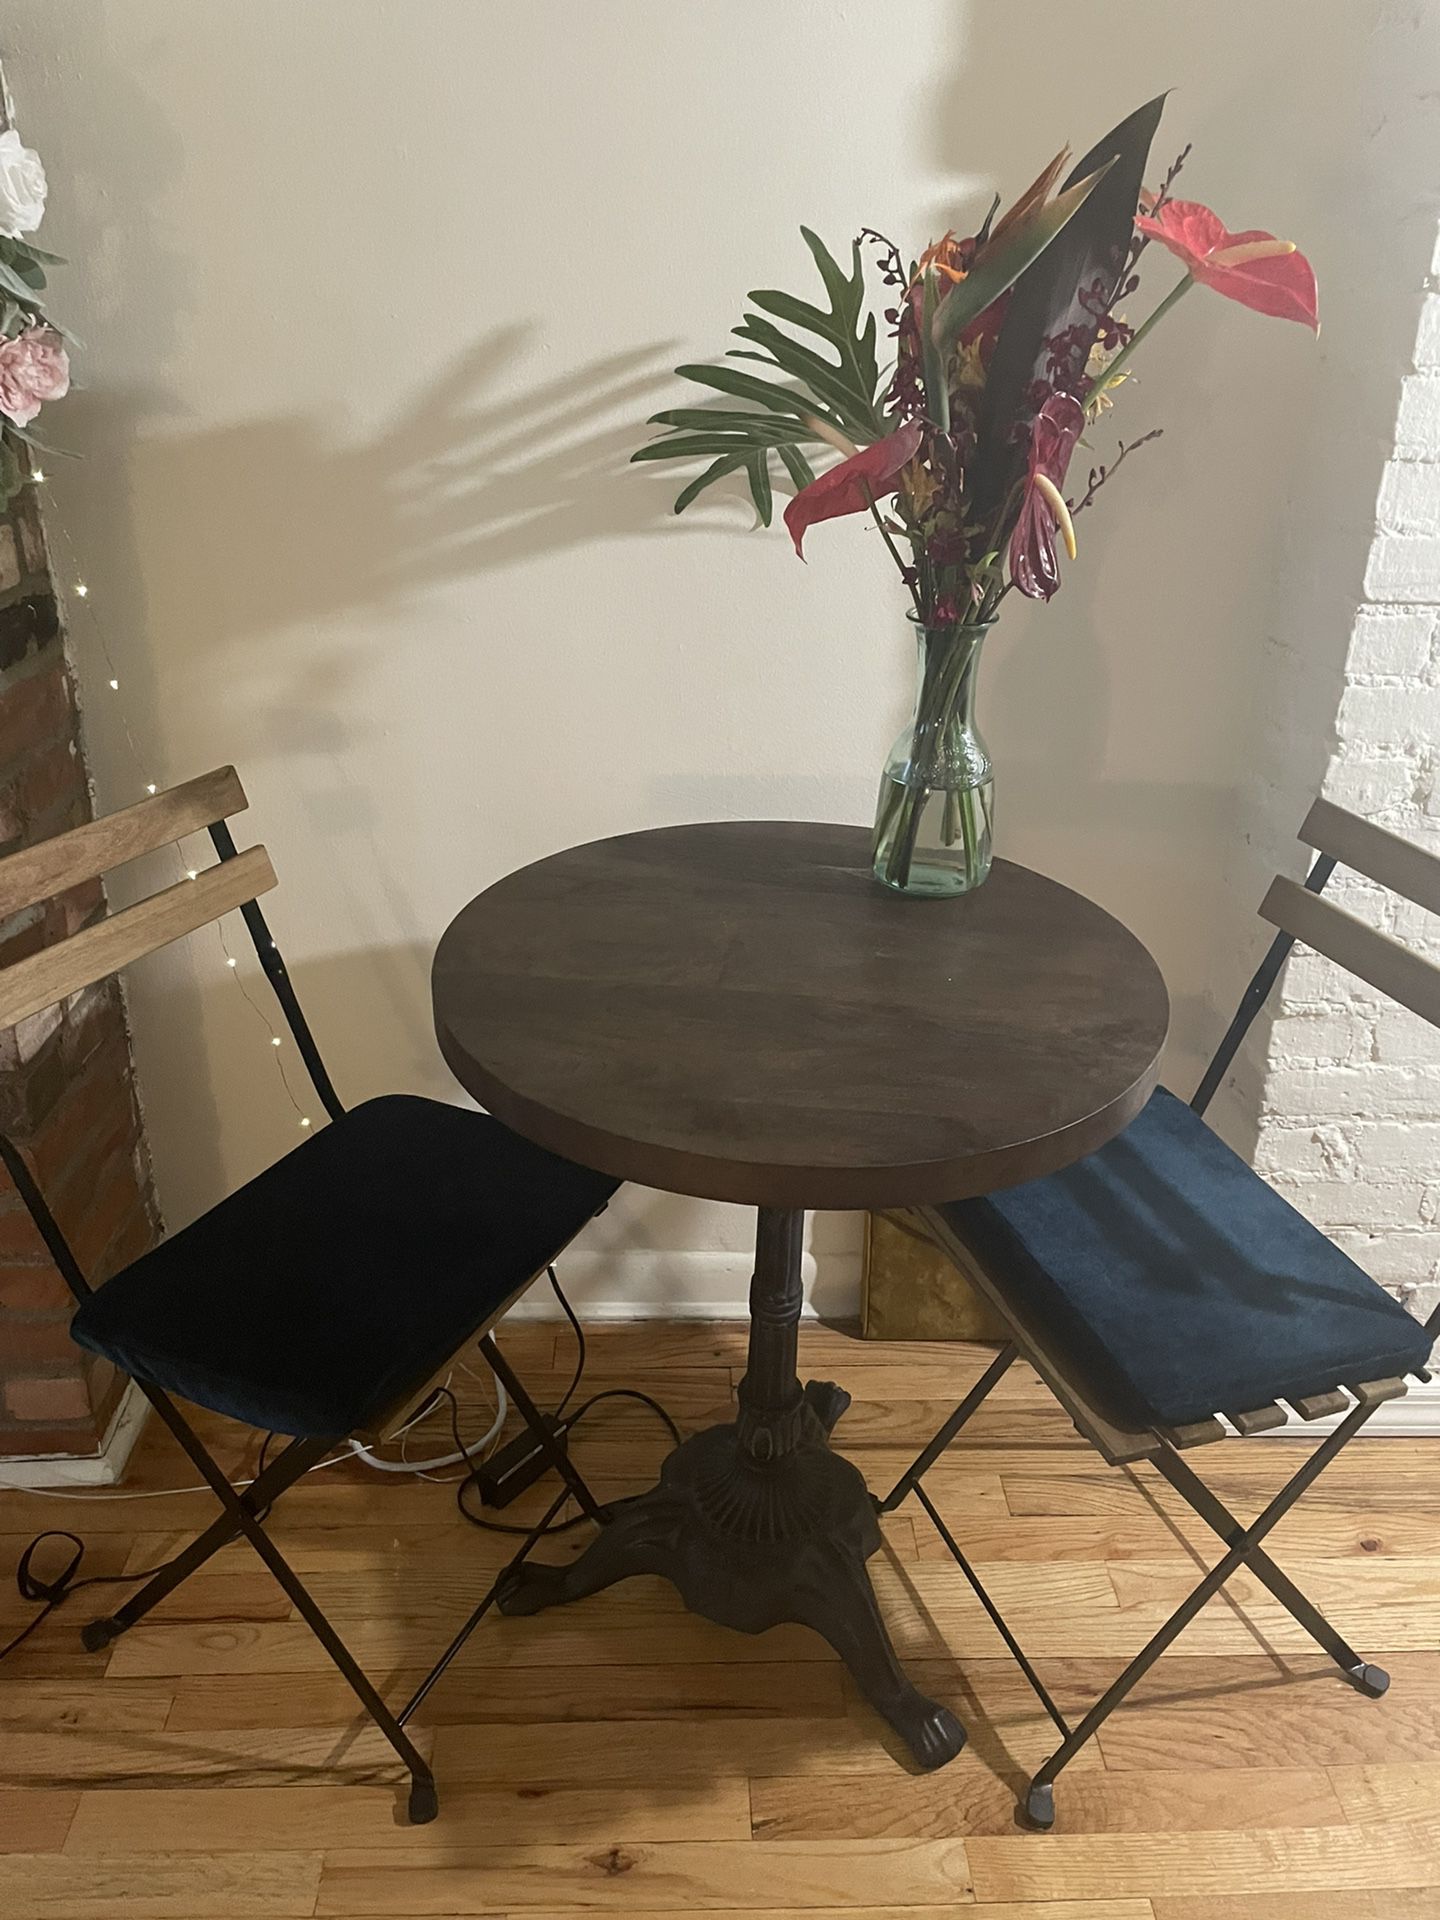 Bistro Table with Chairs